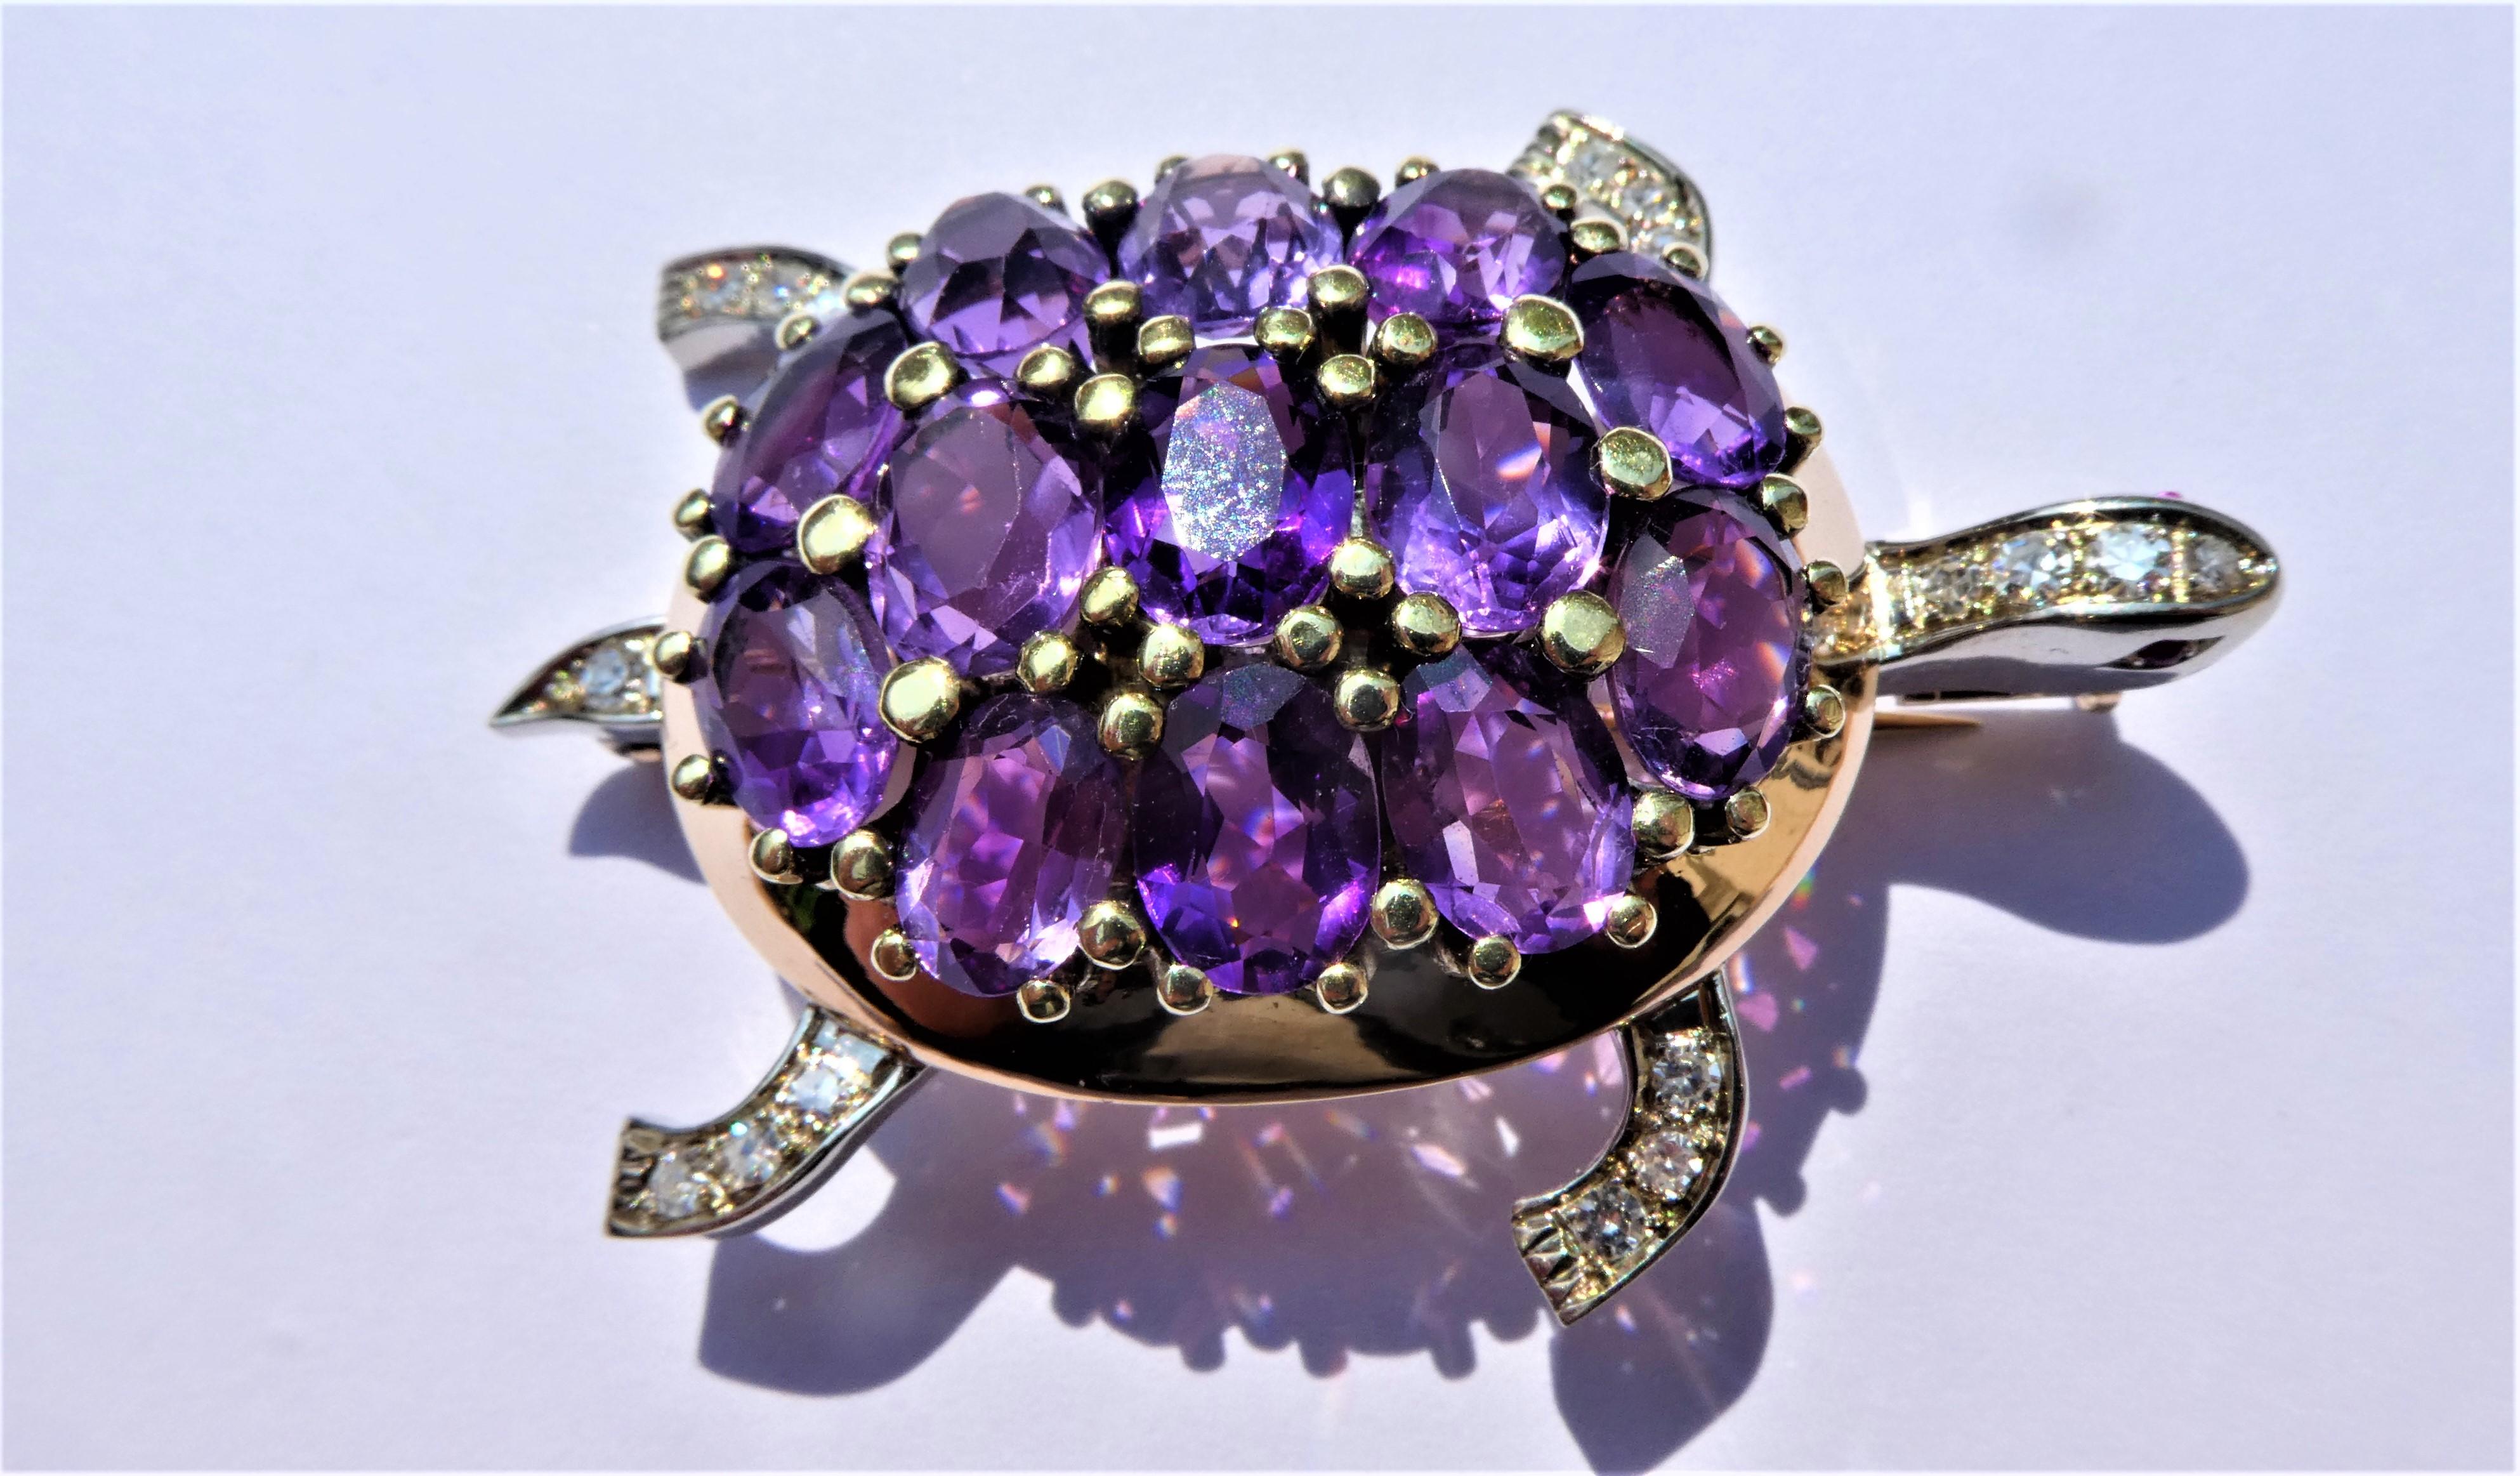 This charming turtle brooch was crafted in the 1980s in Vienna. It has several Austrian stamps like two horse heads, KN for the goldsmith and another stamp on the pin. 13 prong set oval faceted amethysts shine in a vibrant purple colour. There are